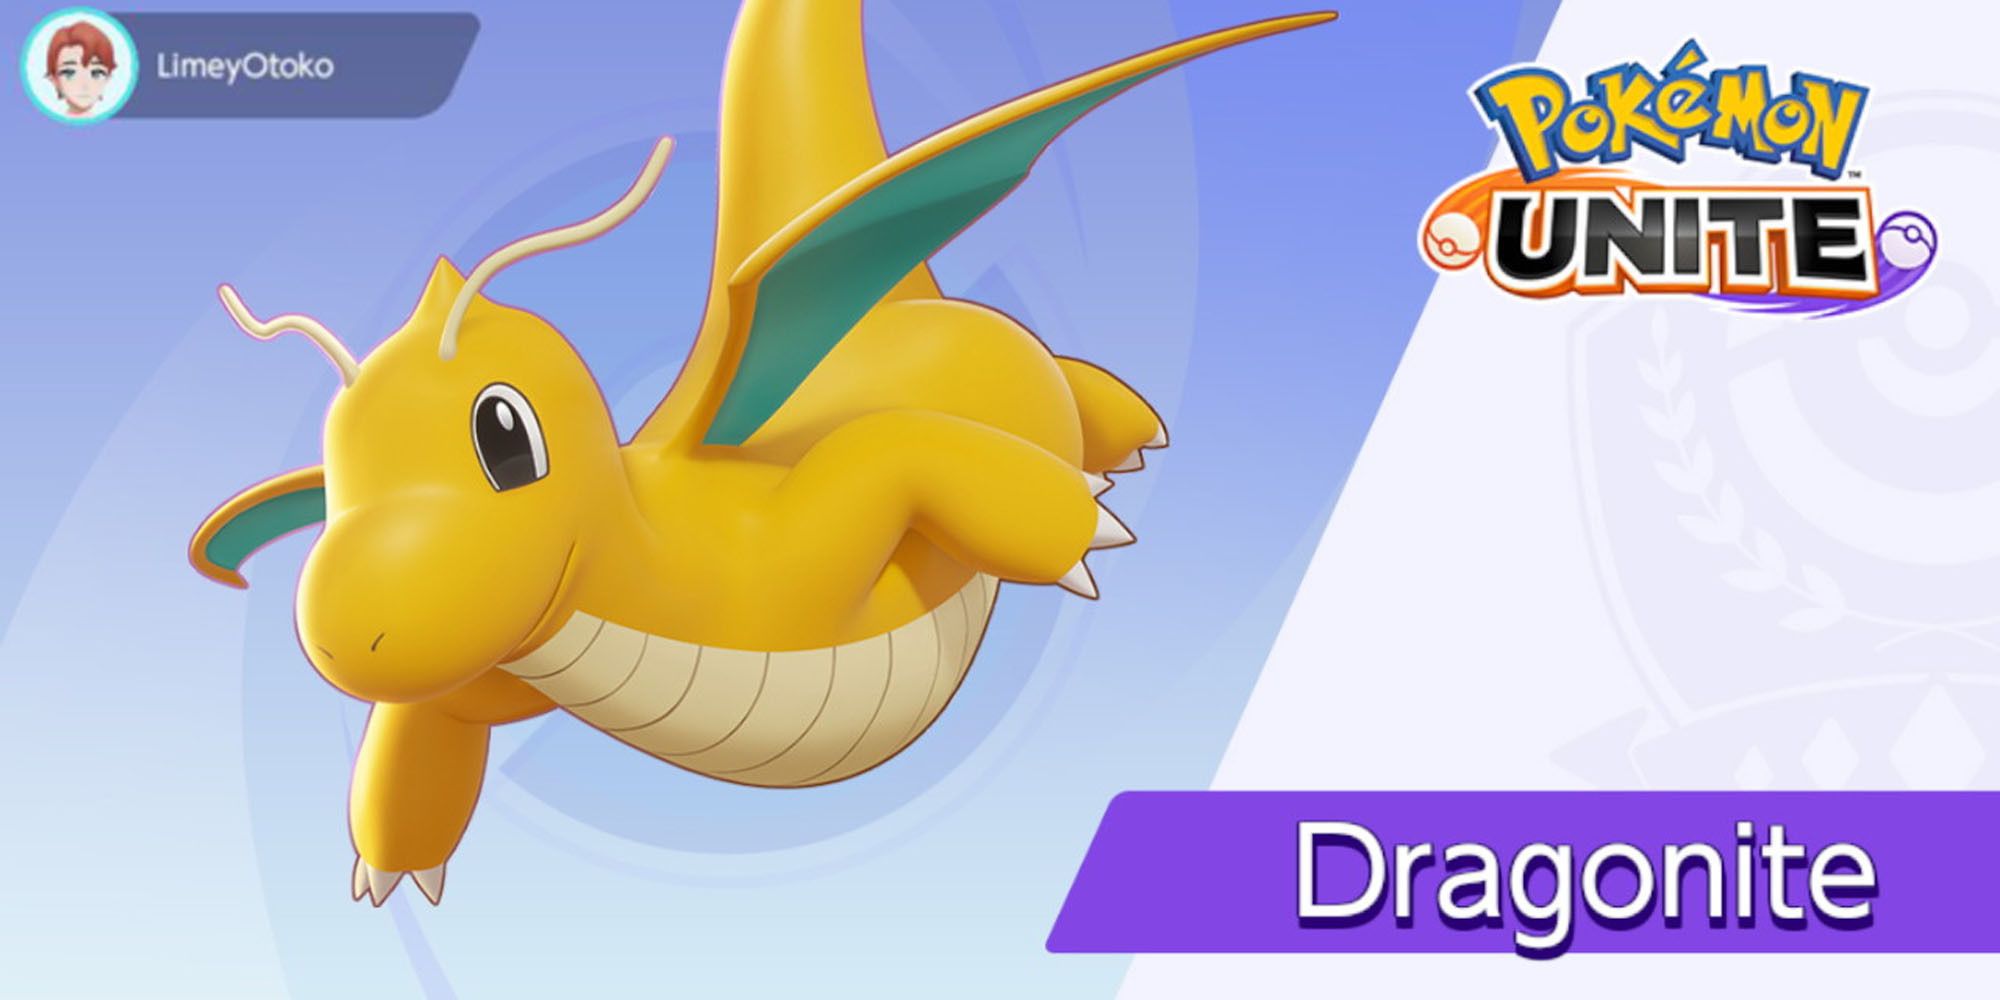 How To Play As Dragonite In Pokemon Unite